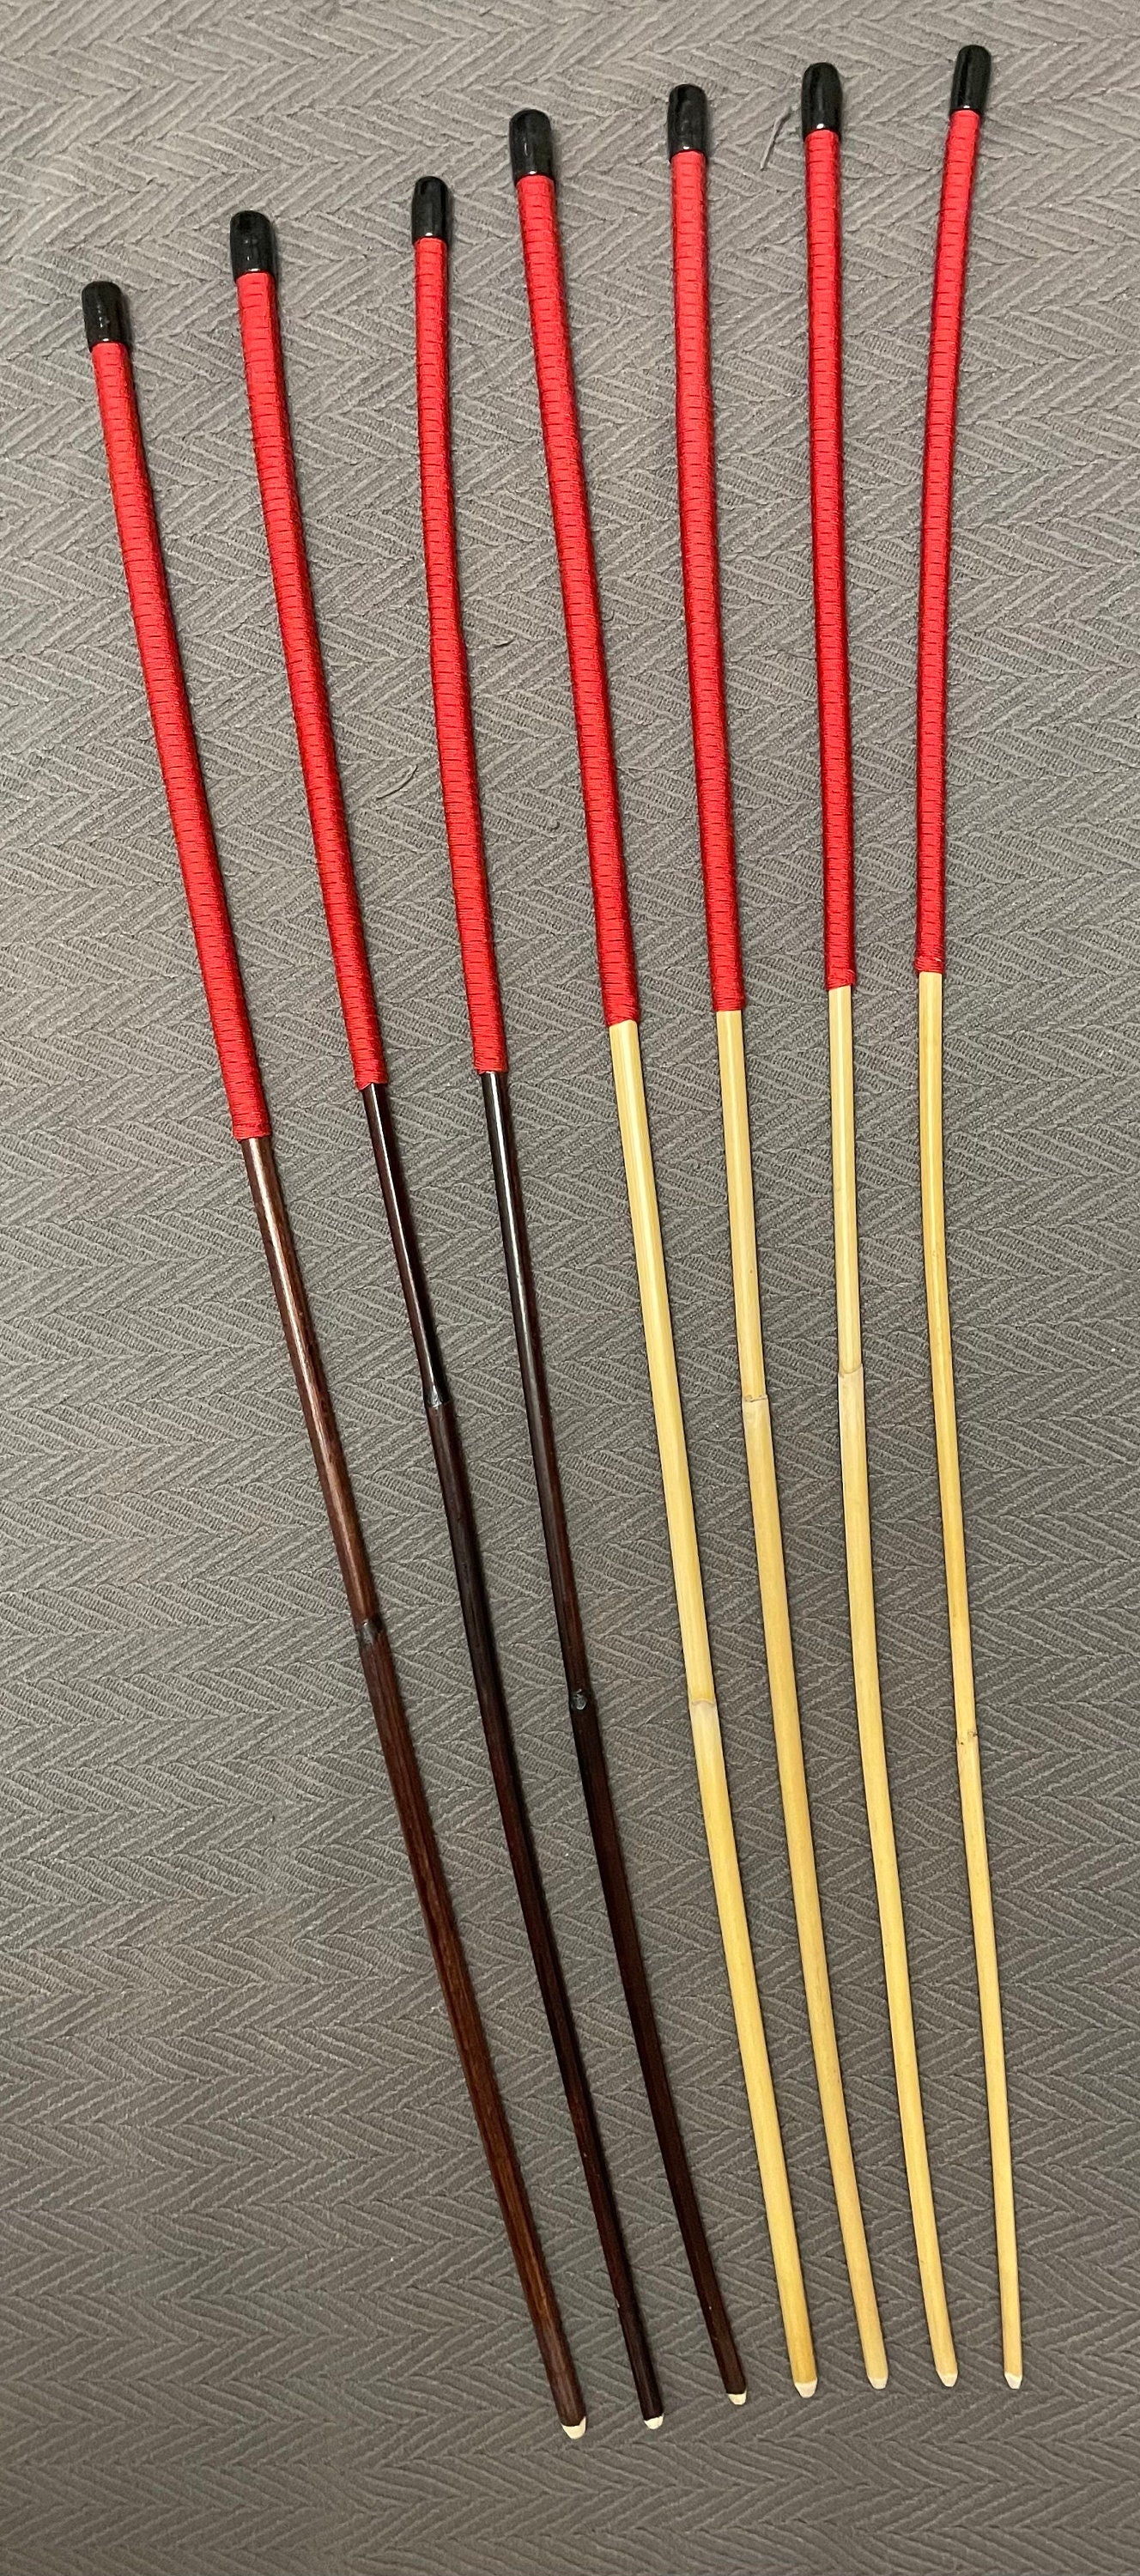 Set of 7 Classic Dragon / Smoked Dragon Canes -  95 cms Length - Imperial Red Paracord Handles